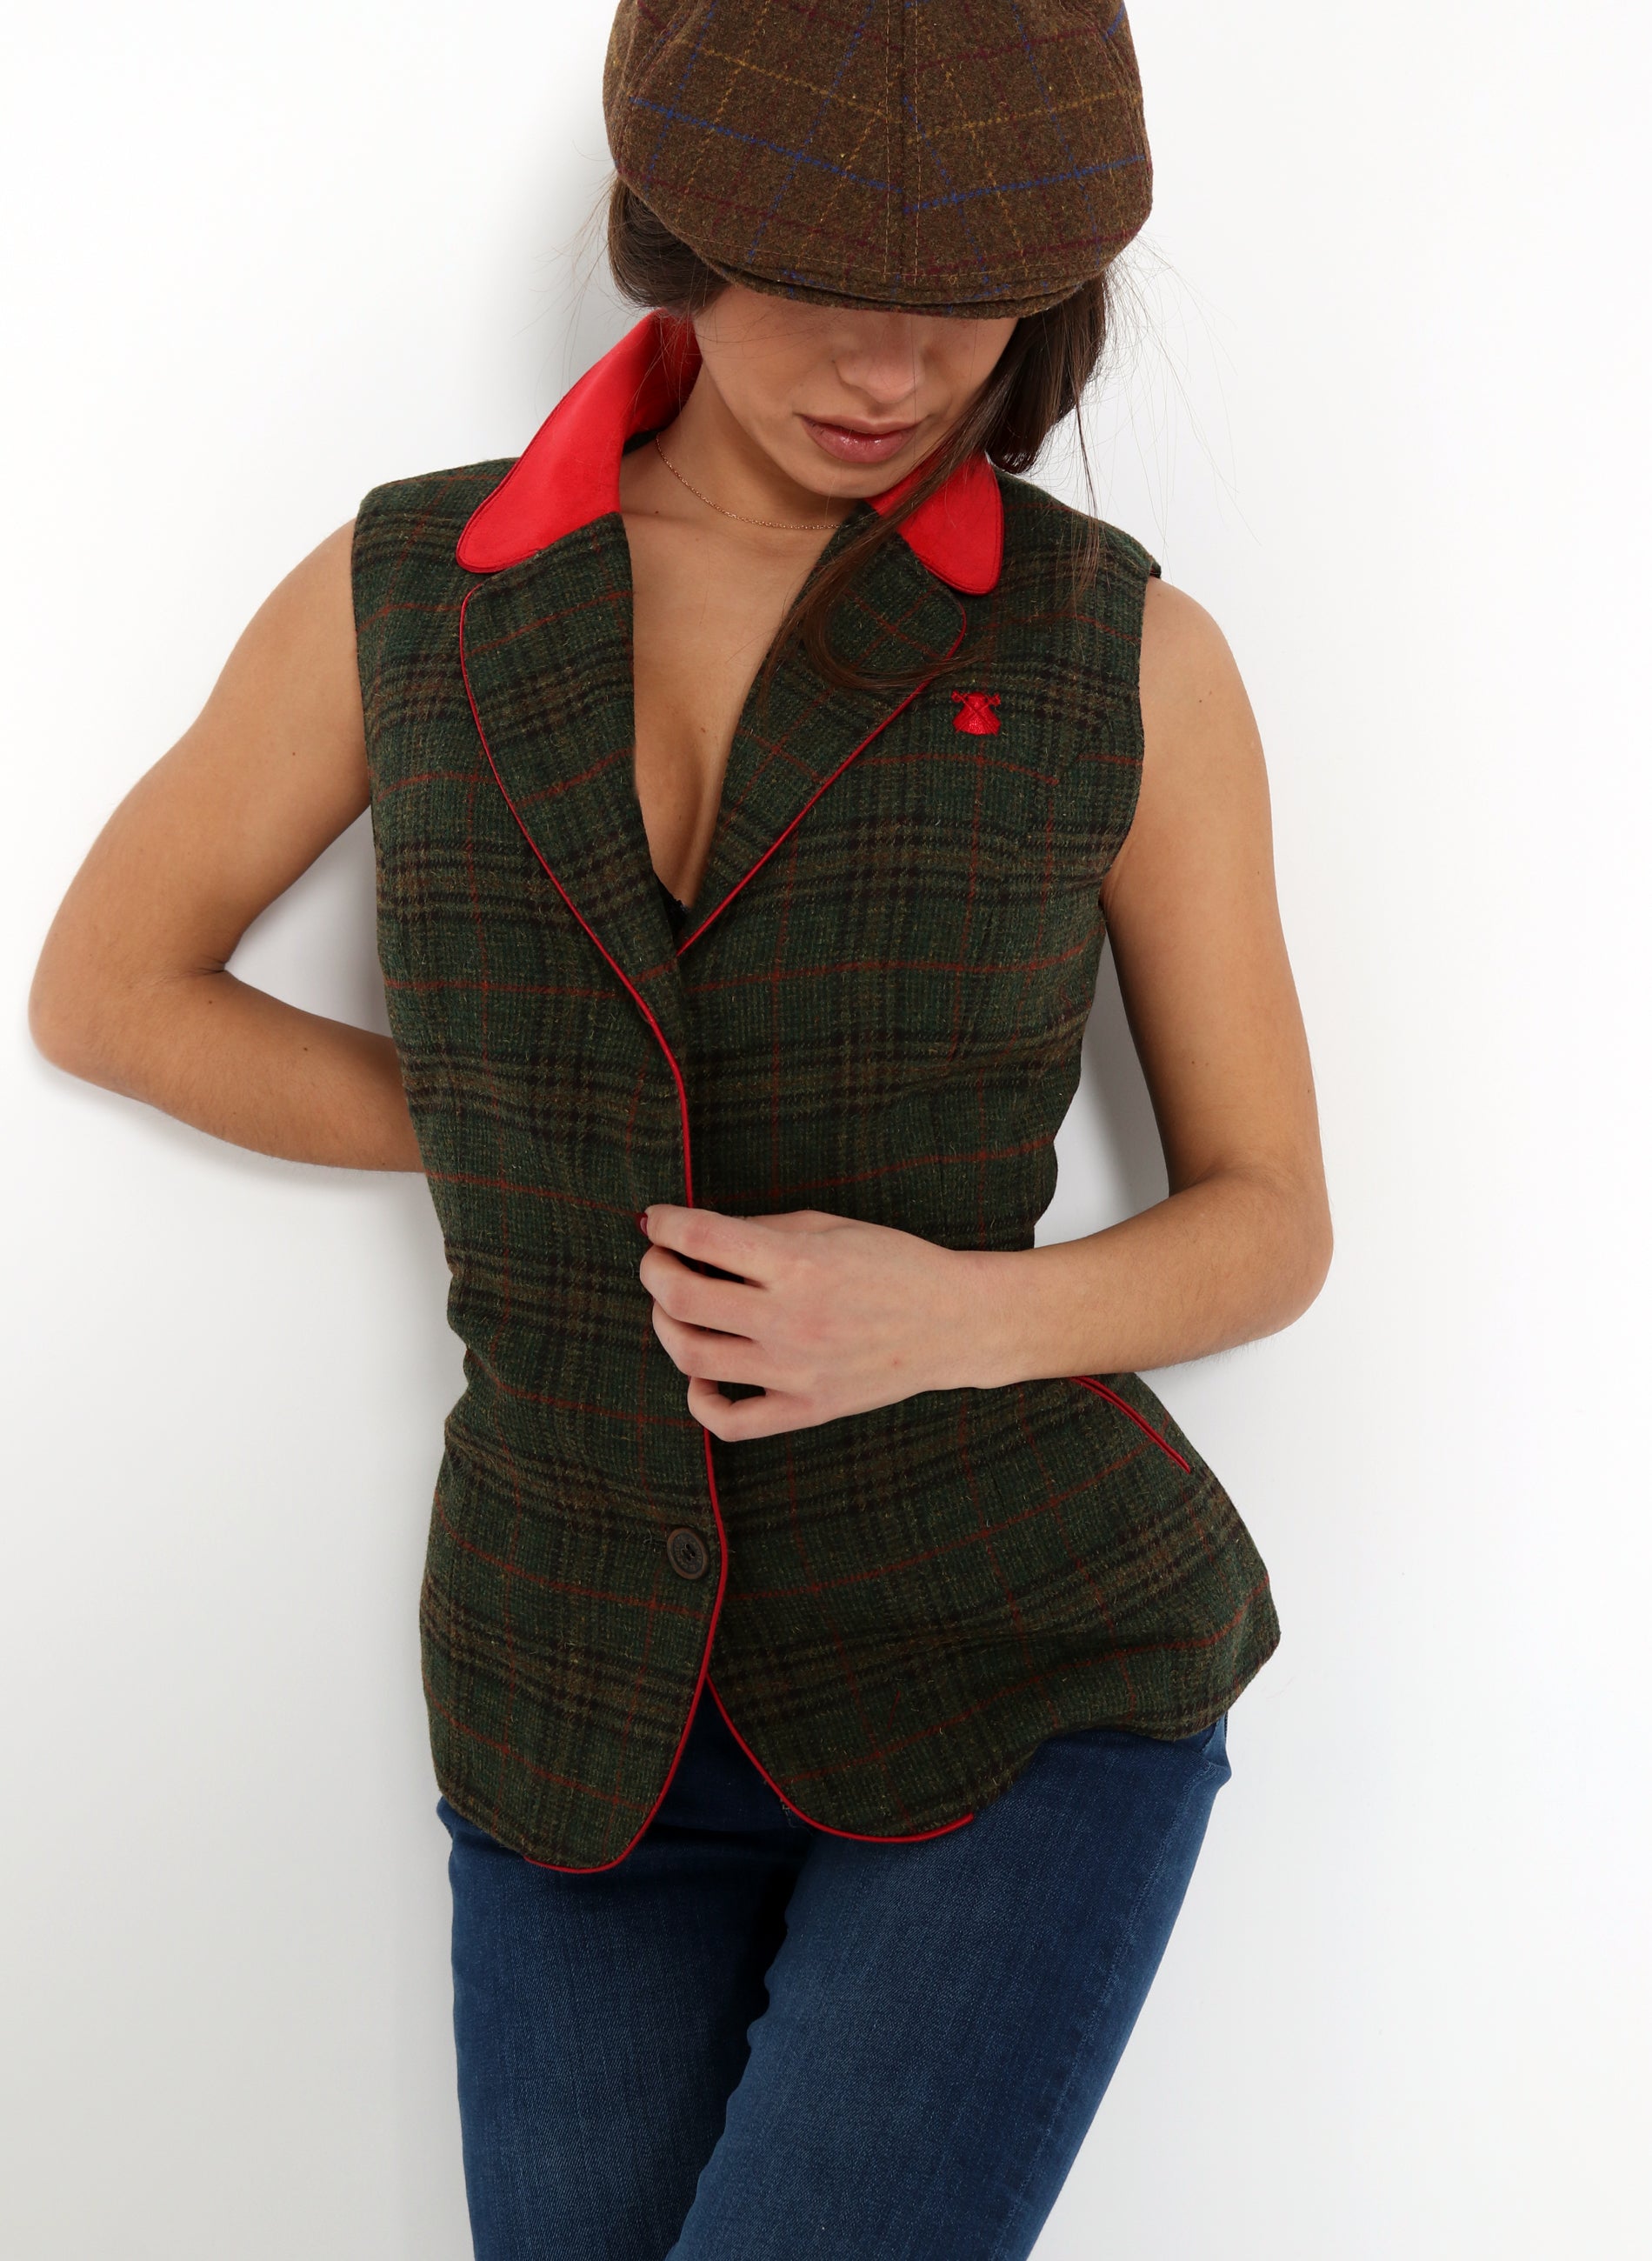 Women's Green and Red Plaid Vest